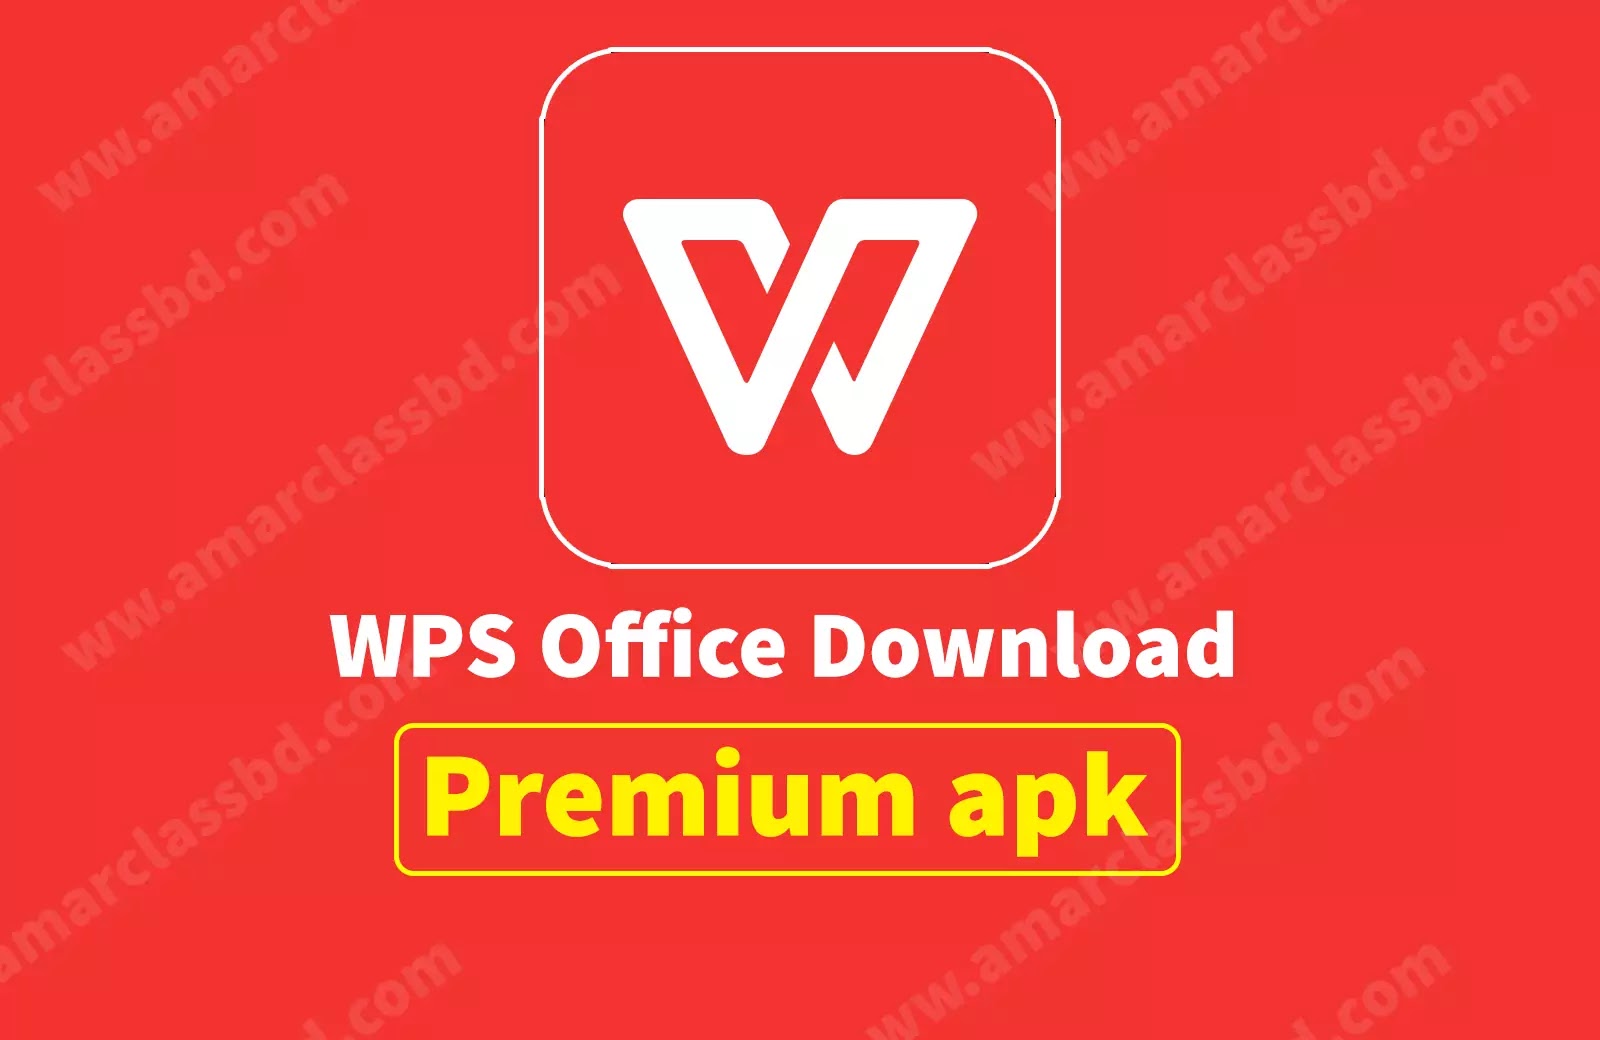 WPS Office Download Premium apk pro free [ latest version of android ]  Remove ads